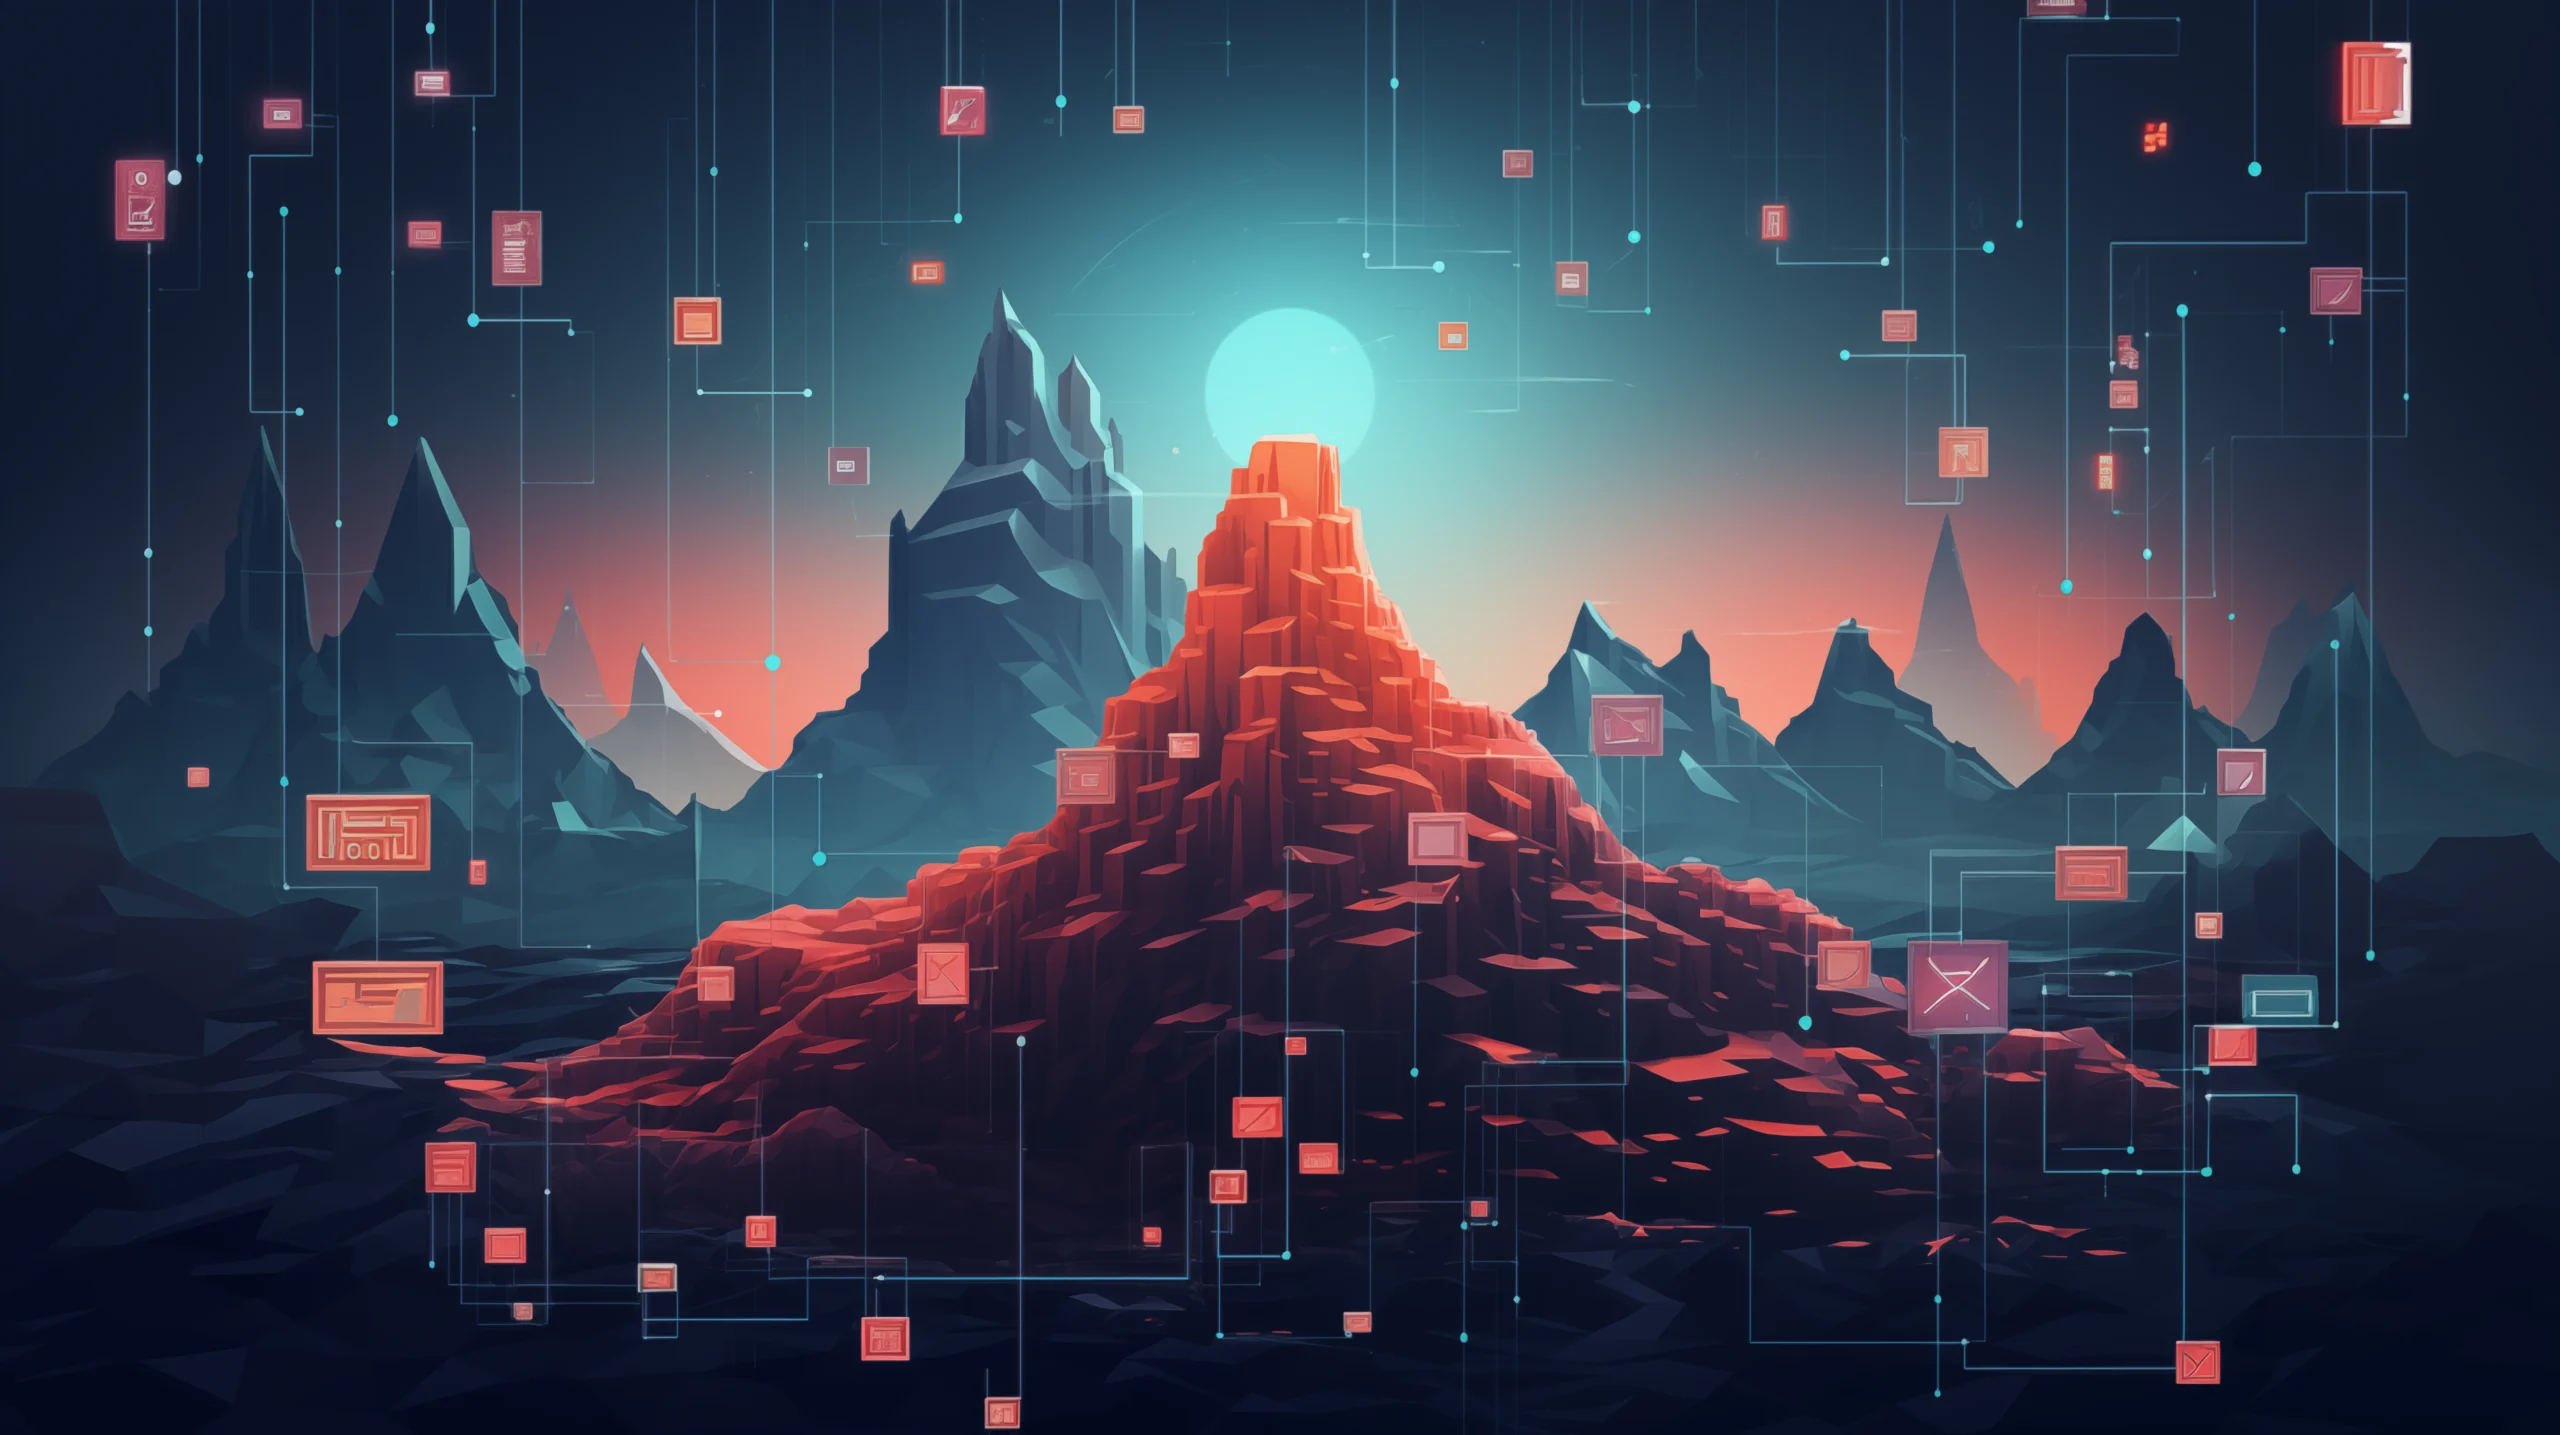 Crypto art featuring a mountainous landscape, symbolizing the Security Levels and risk management in crypto trading